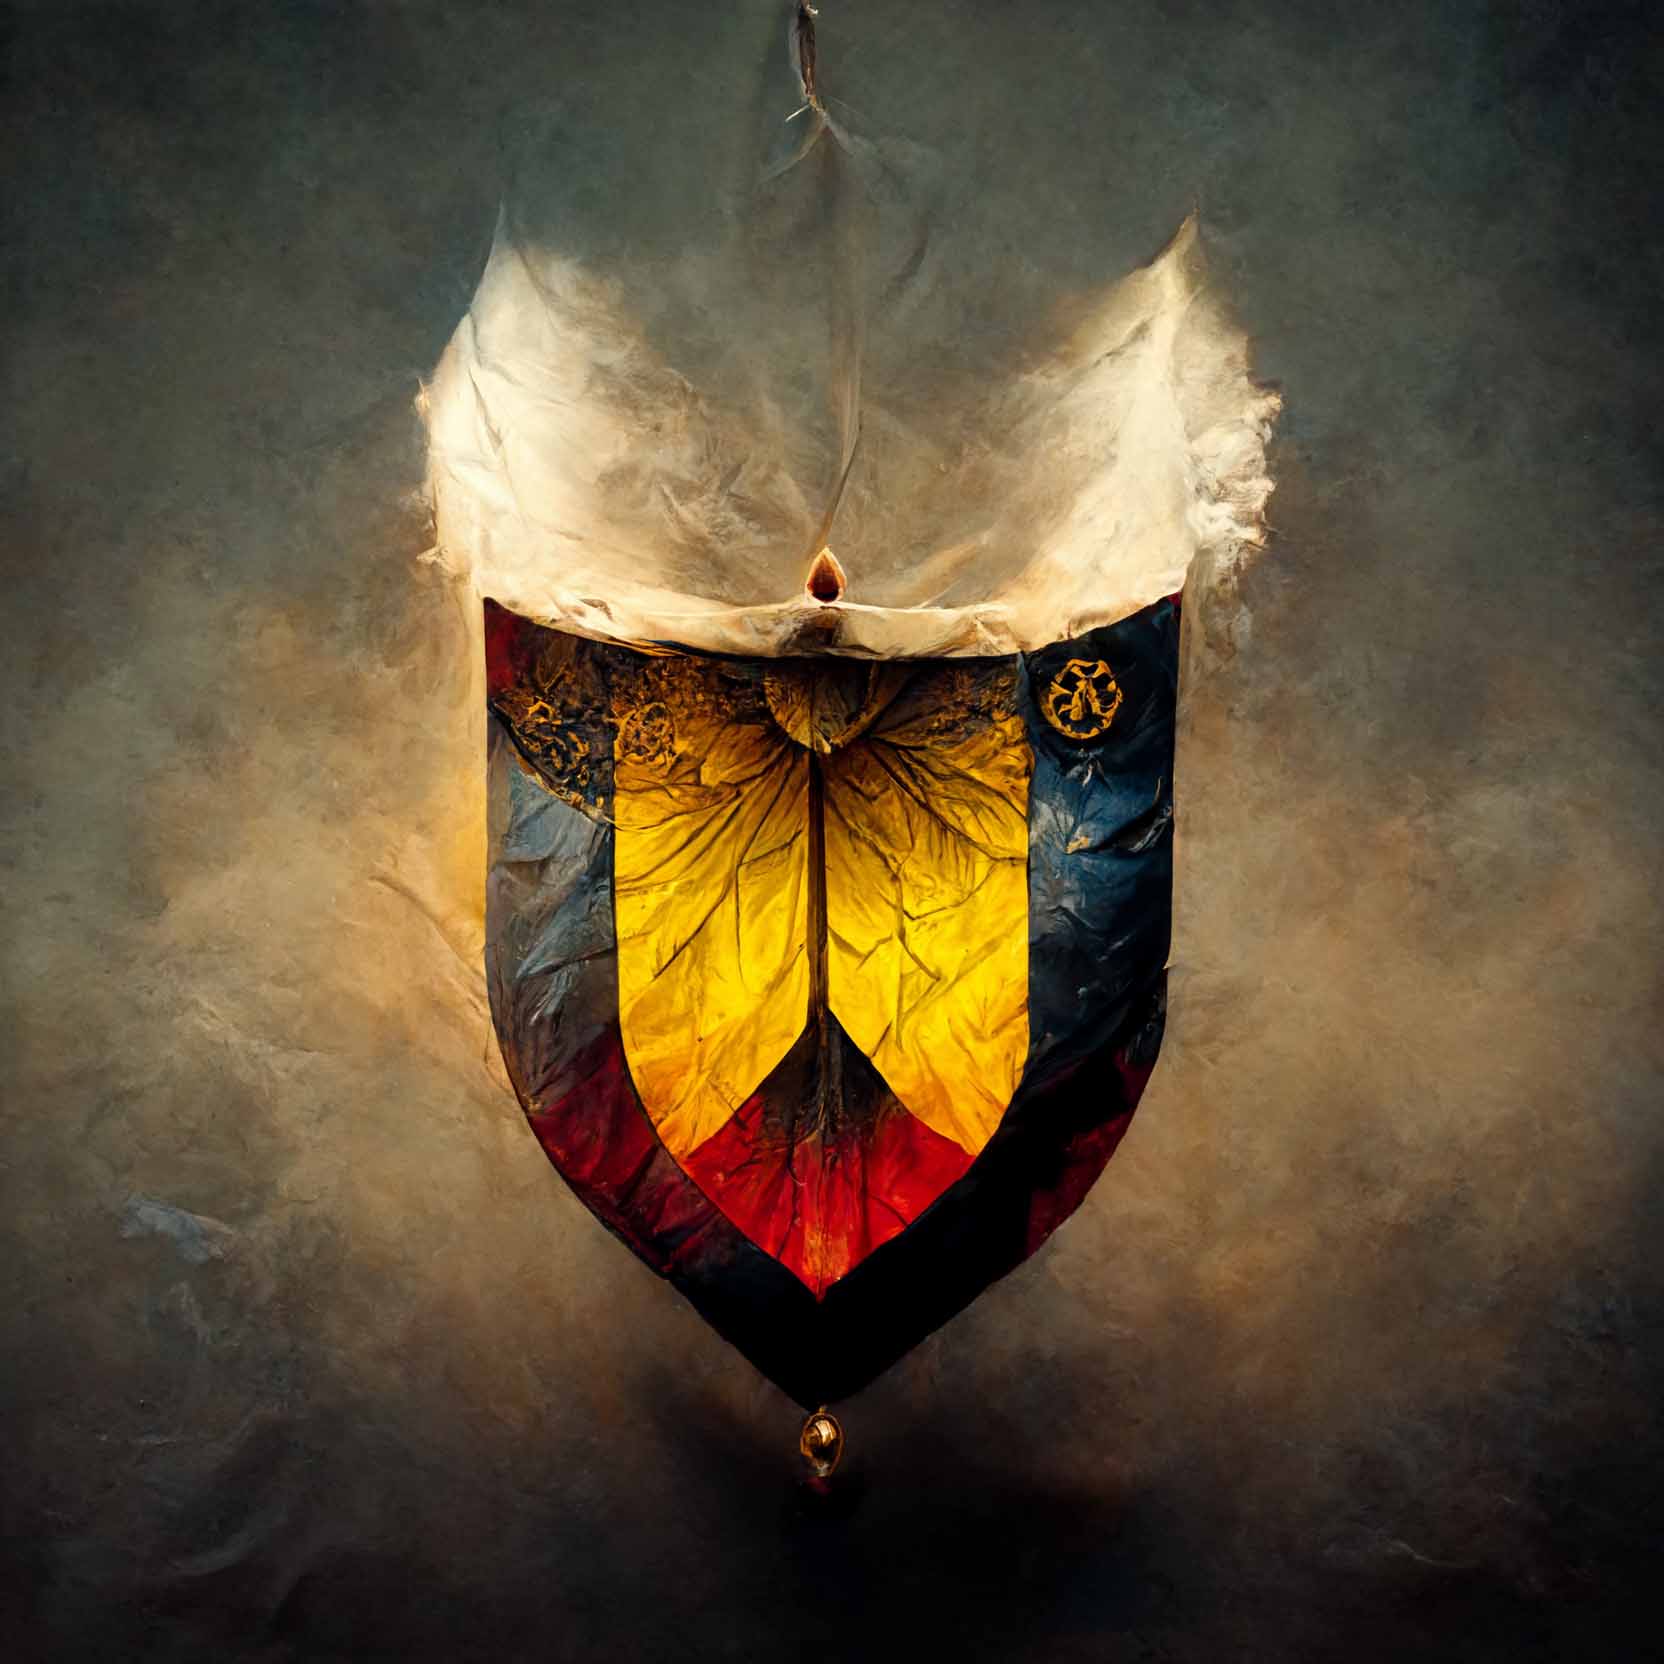 an image of a medieval emblem crest. Smoke surrounding the crest. Golden, blue and red colors